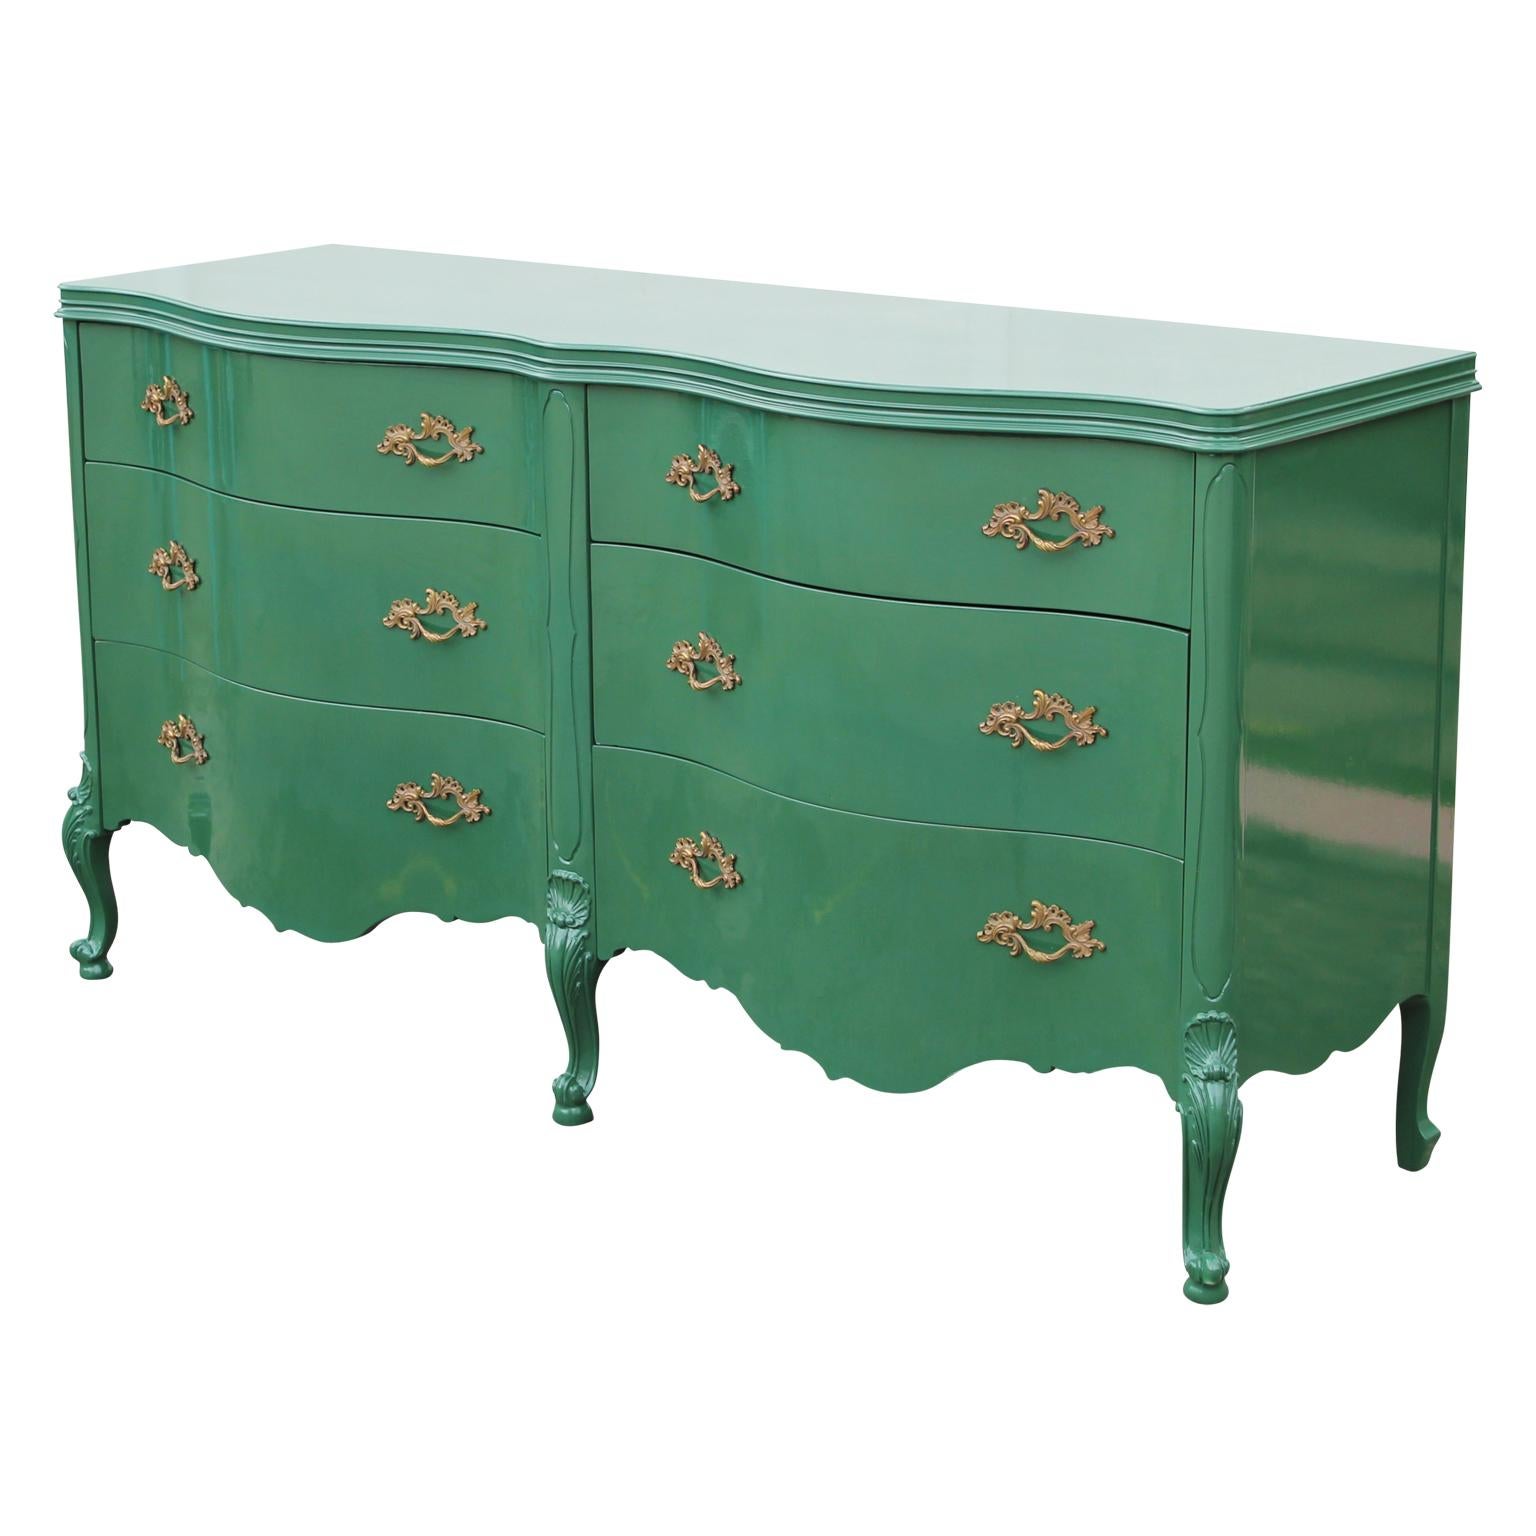 French Louis XIV lacquered green double serpentine front brass handles dresser. Circa 1930's, in the style of Baker furniture. Bold stunning look in any room. Fresh restoration.